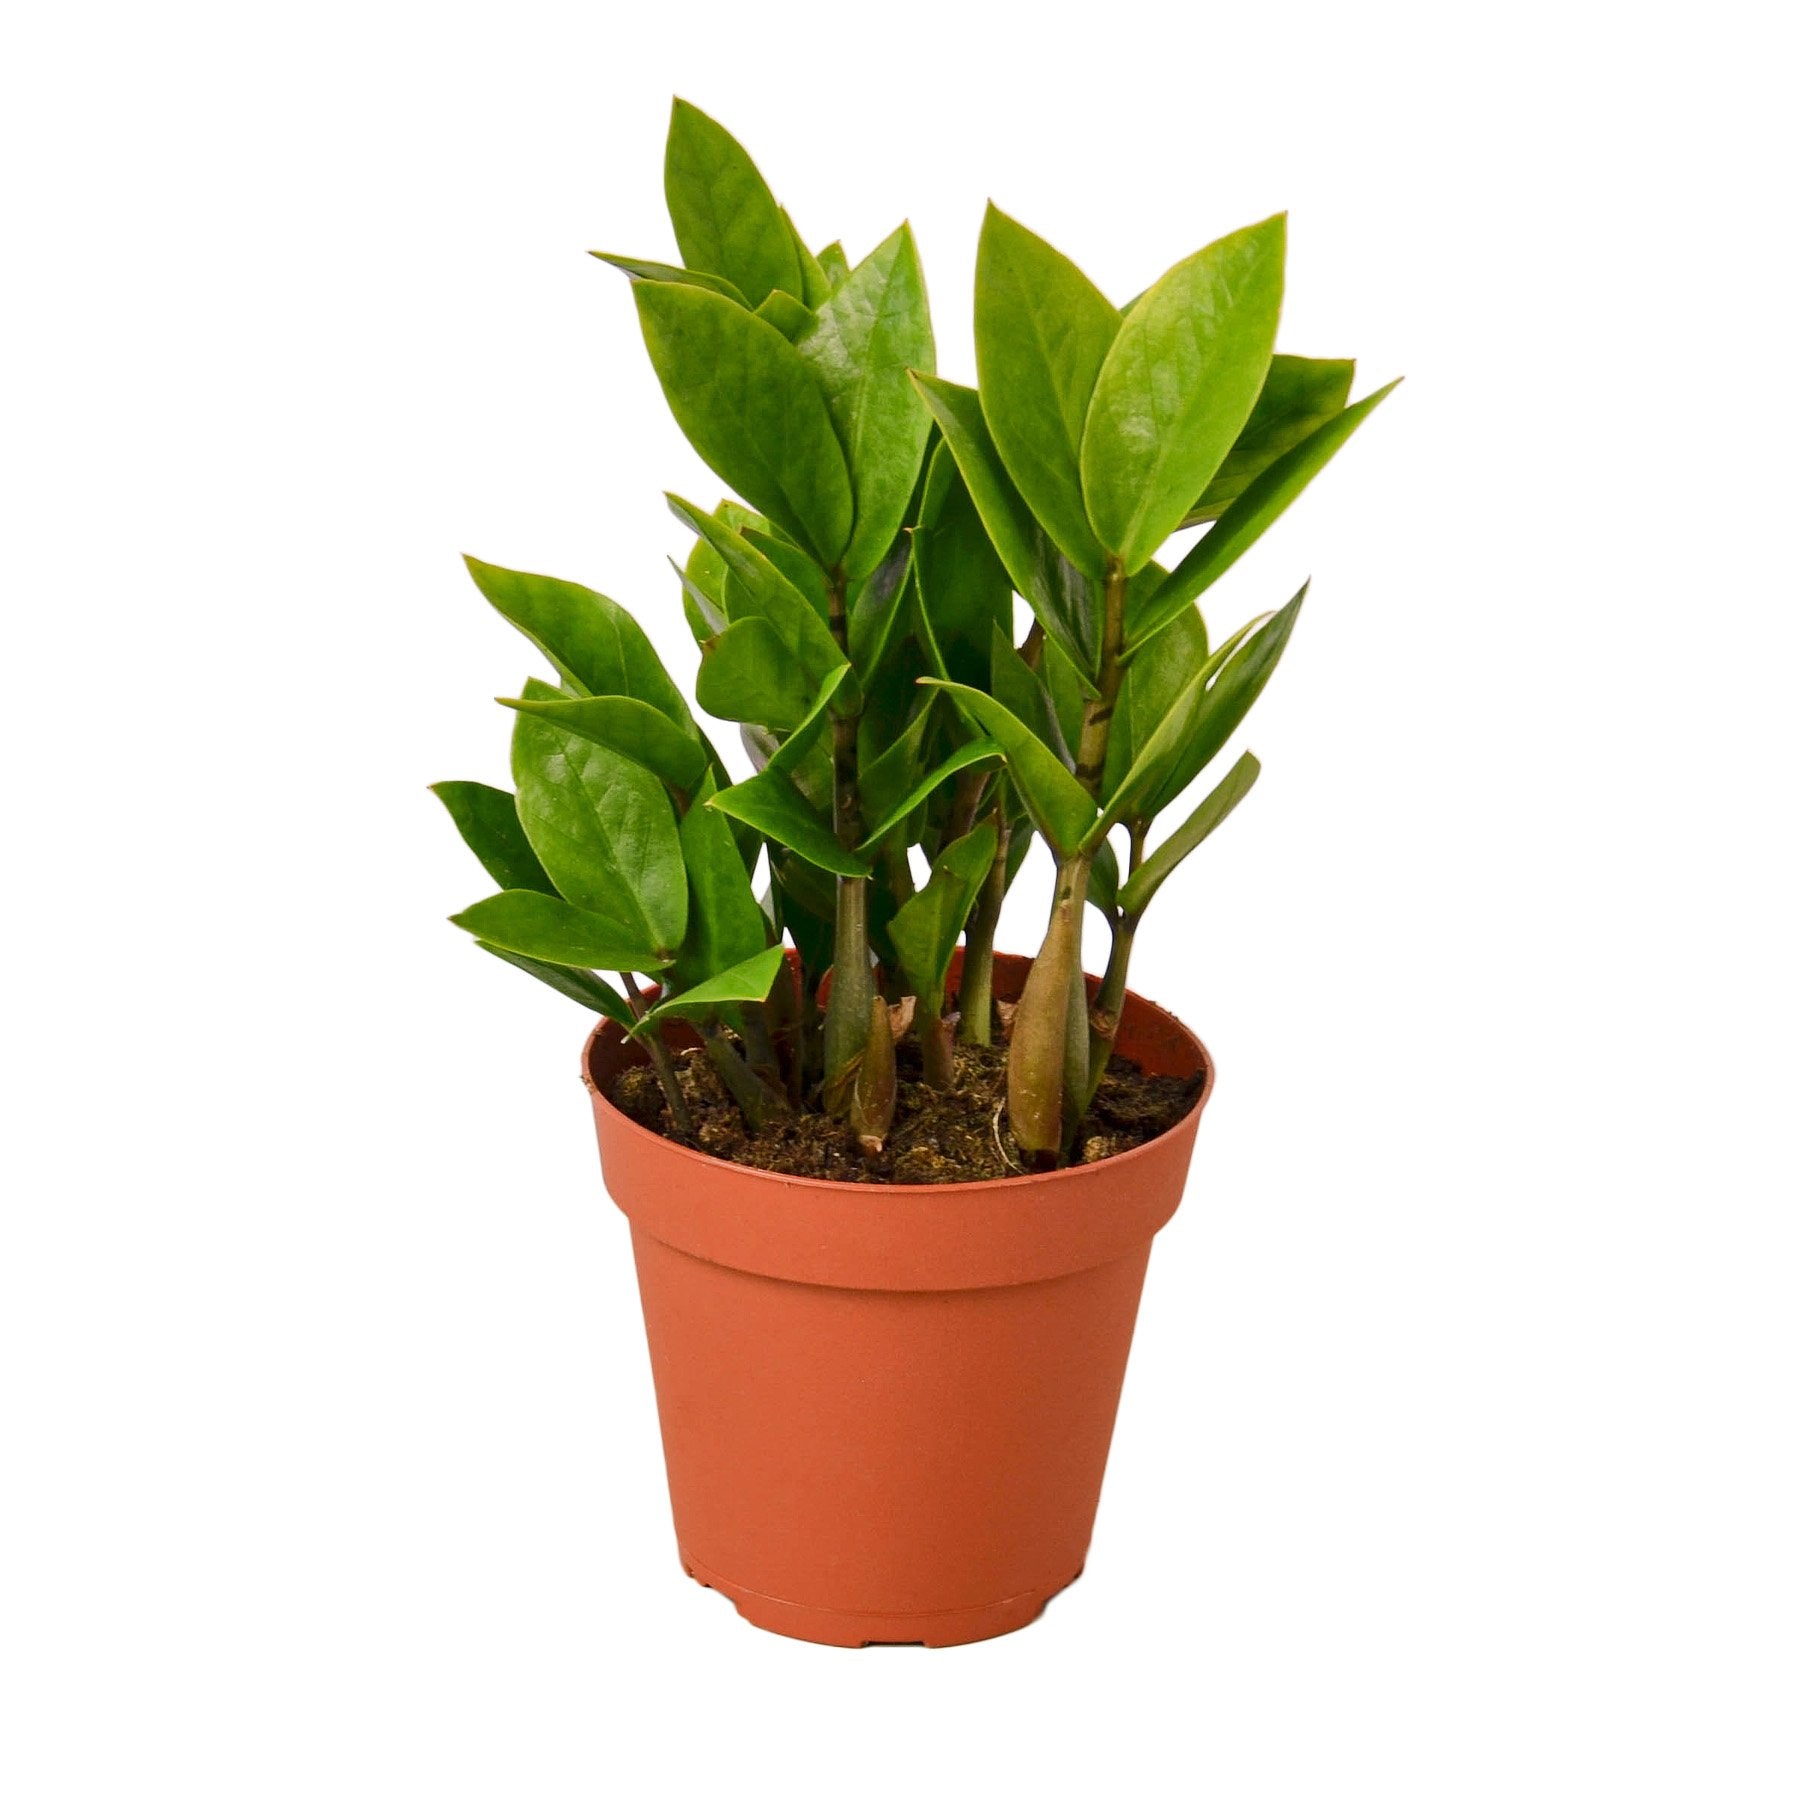 A small plant in a pot.